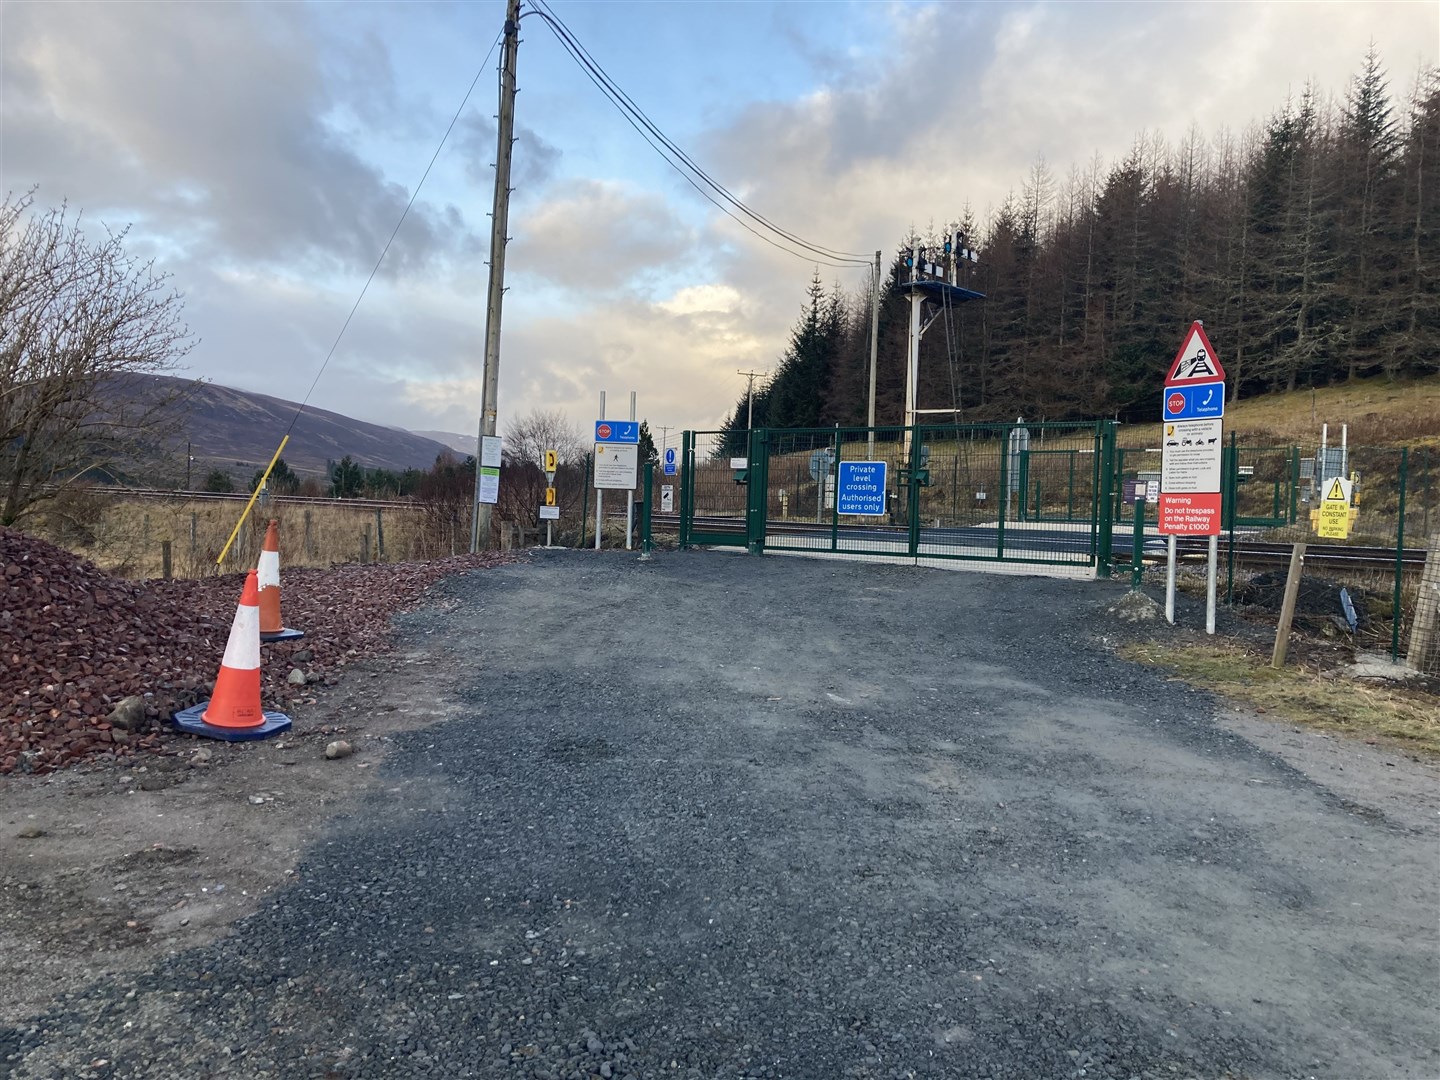 More secure fencing and a bigger gate were recently erected at the crossing by Network Rail.